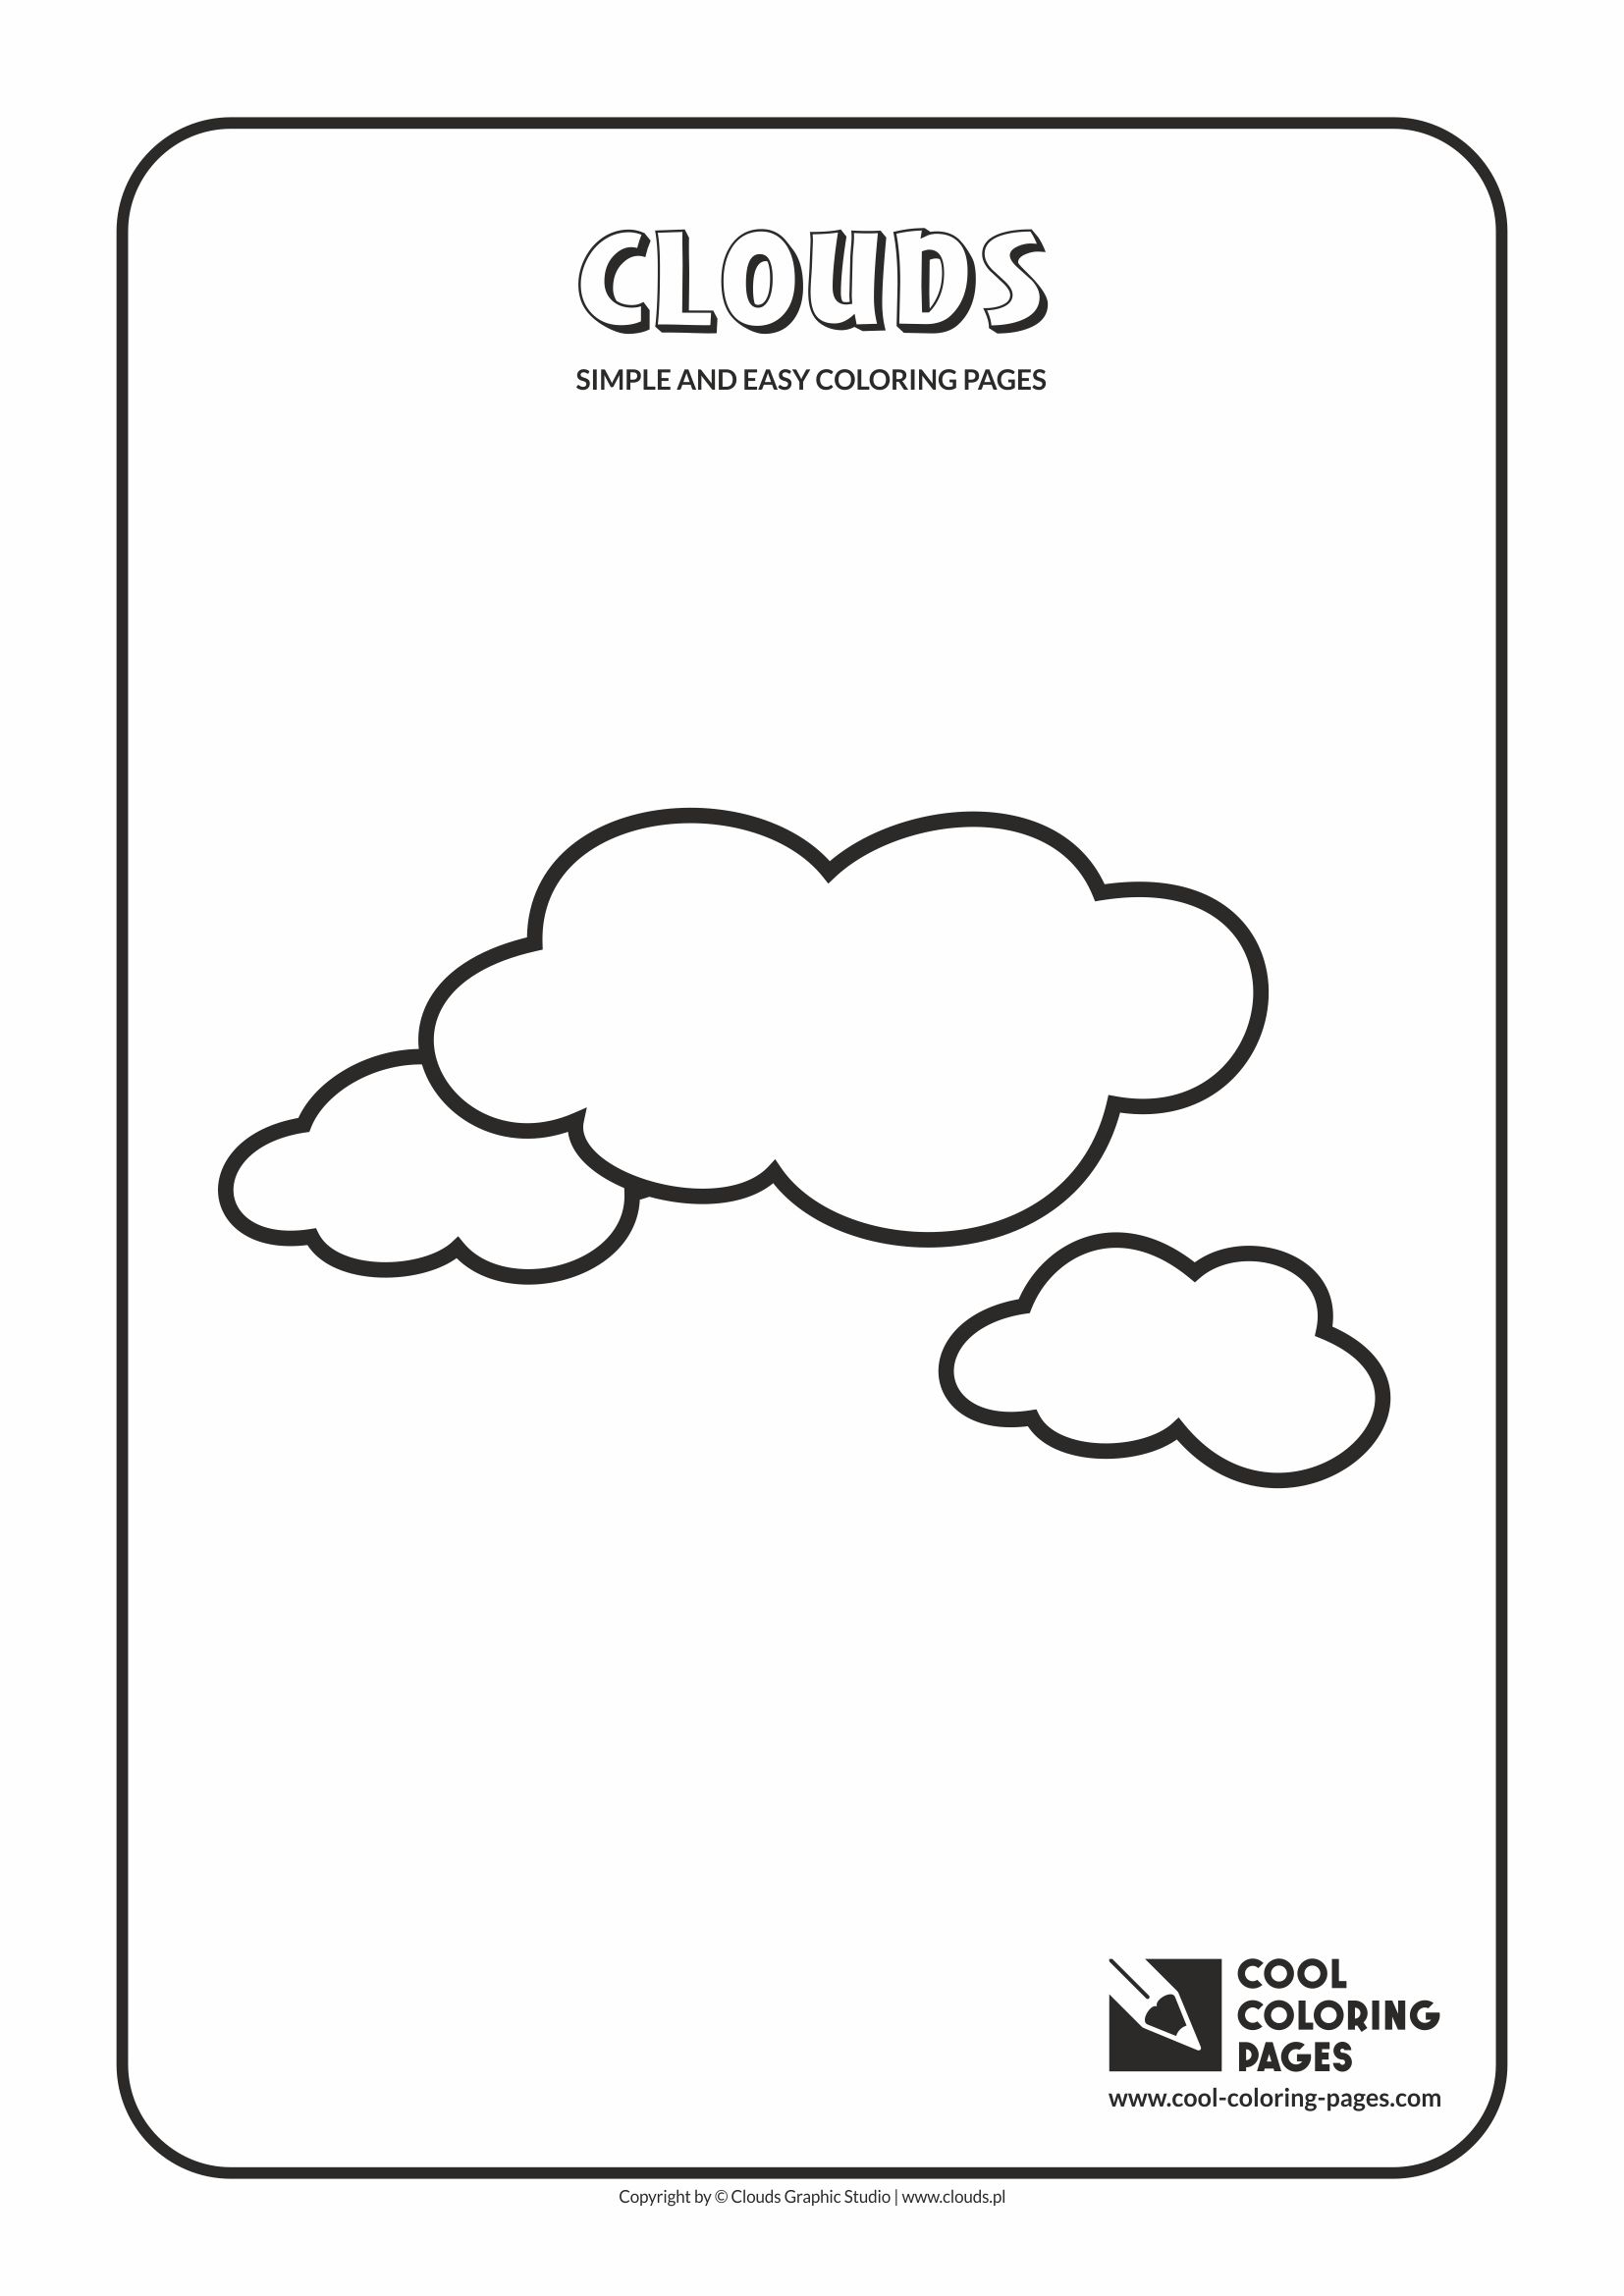 Simple and easy coloring pages for toddlers - Clouds